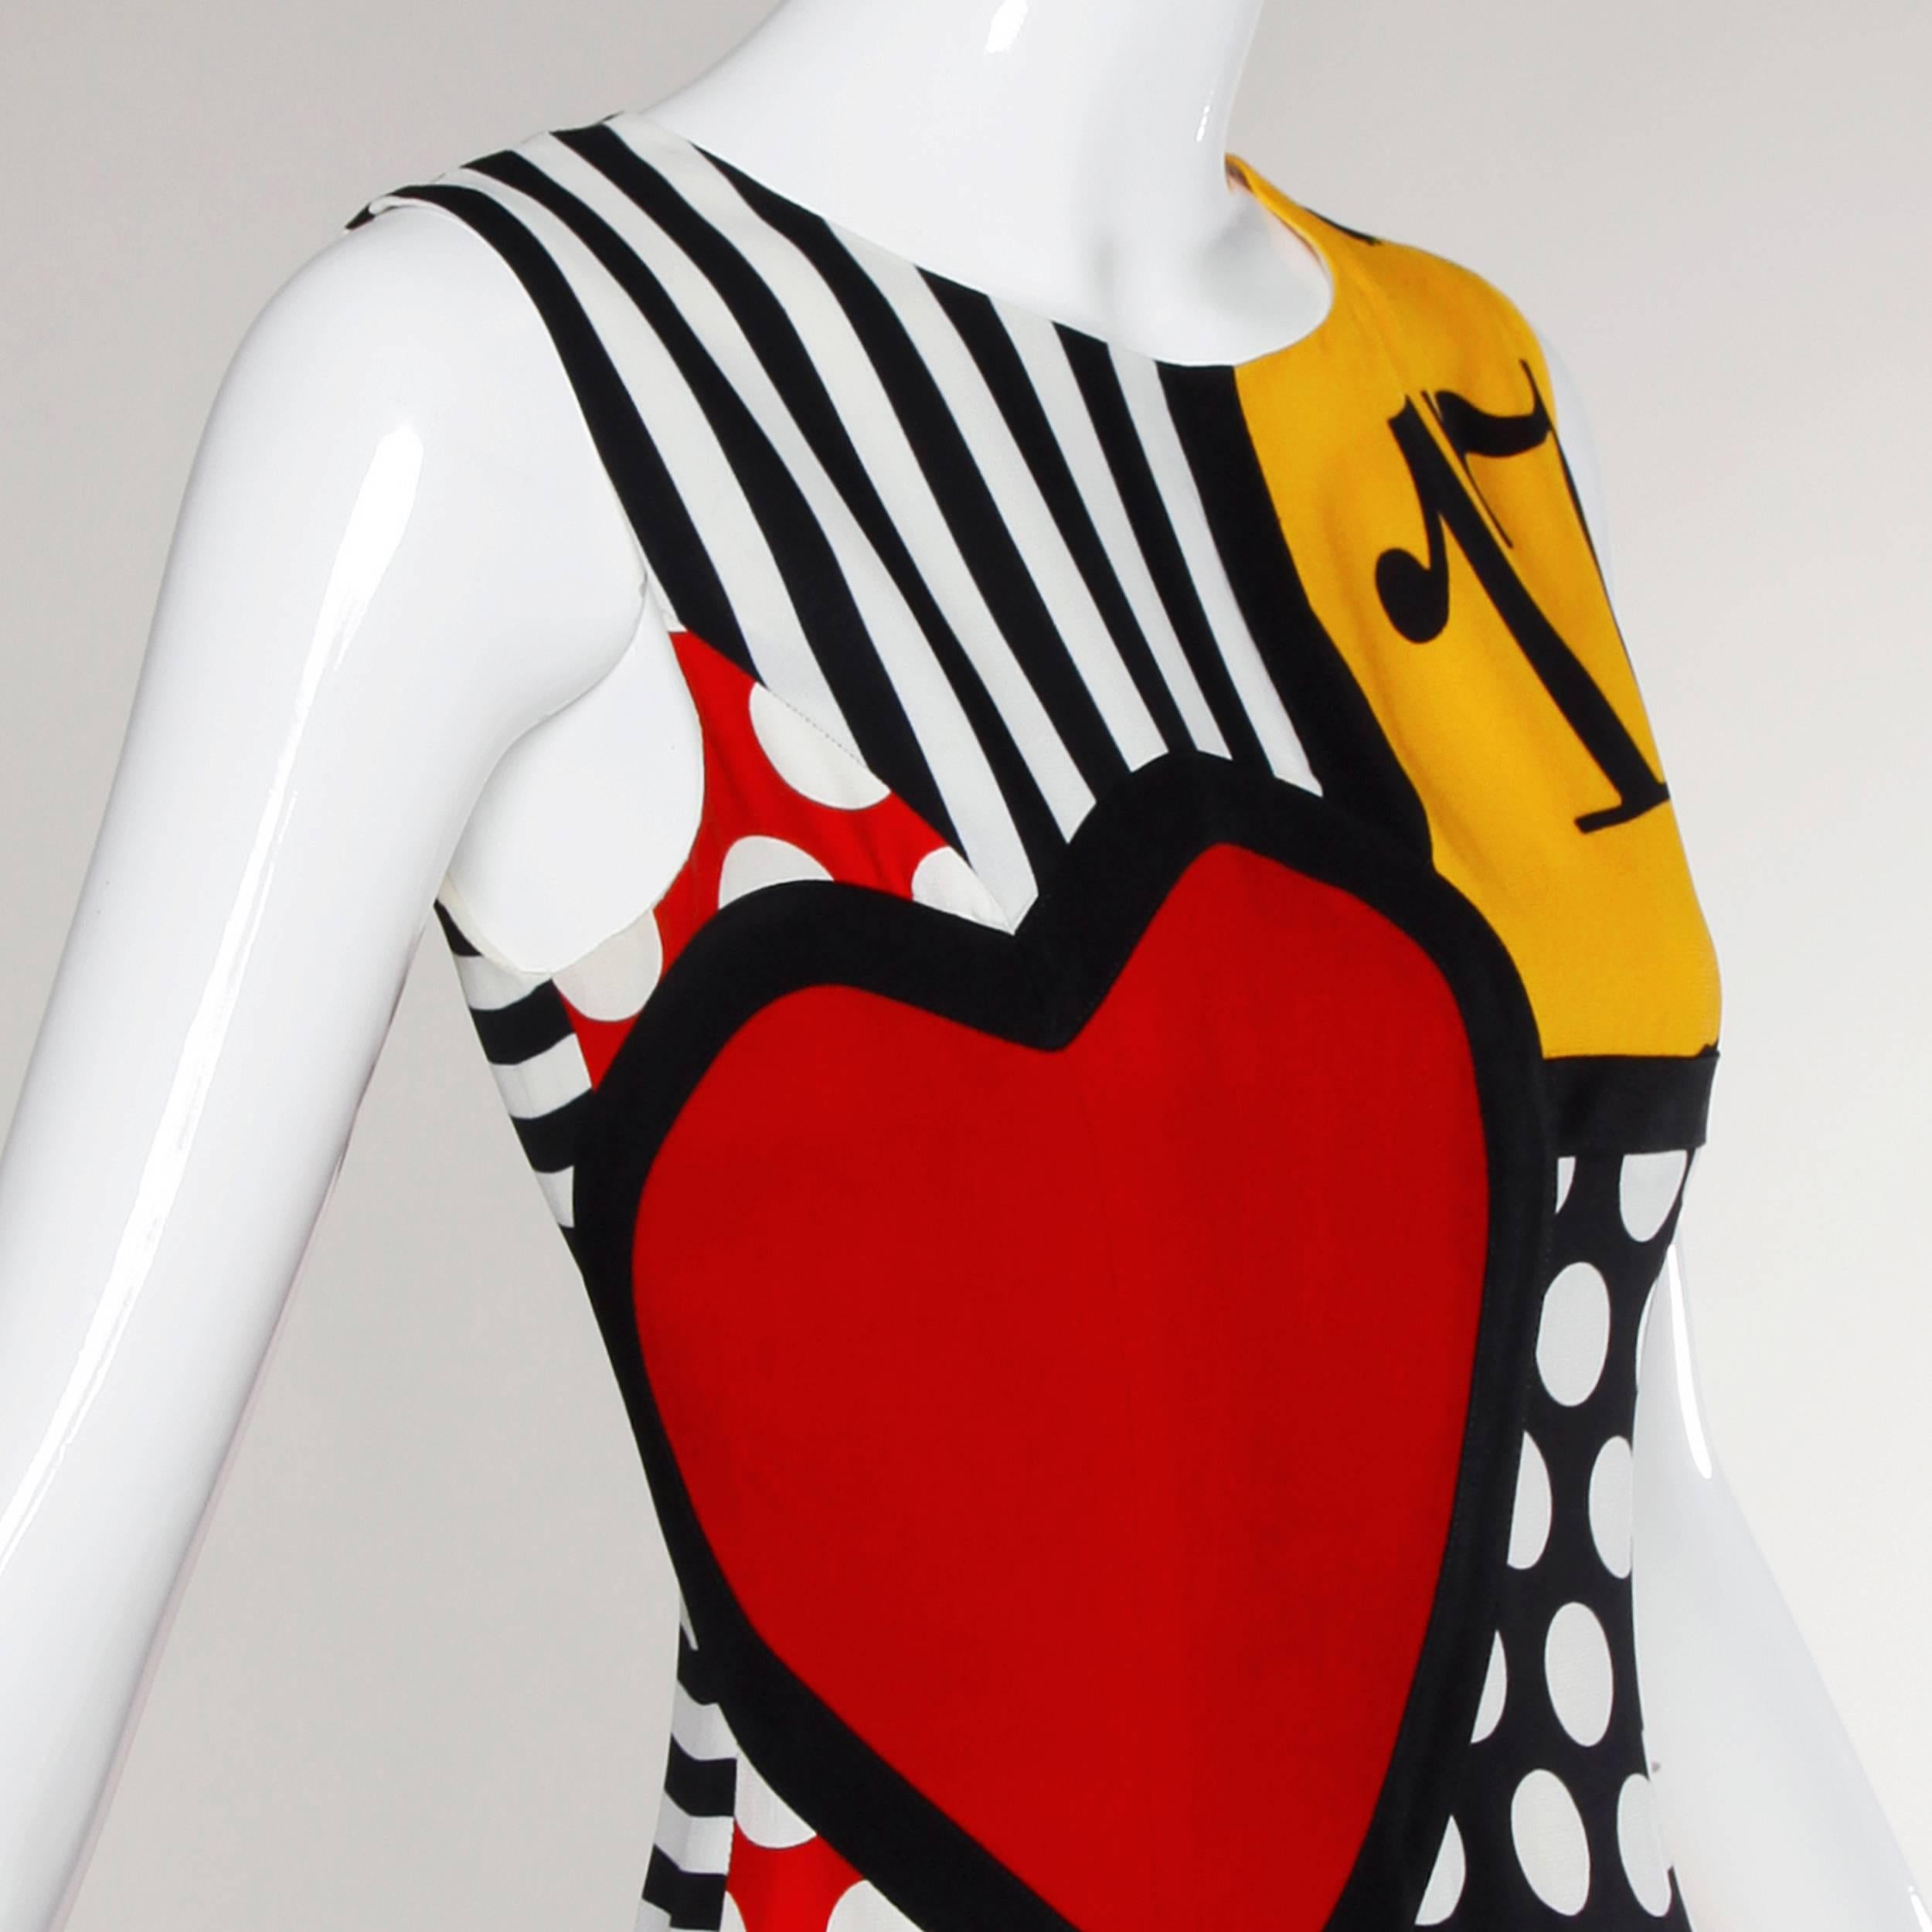 Reduced from $950! Iconic vintage Moschino dress with a vibrant pop art design which features numbers, polka dots, stripes, a heart, black cats and horseshoe design. 

Details:

Fully Lined
Back Zip Closure
Marked Size: I 42/ US 8/ D 38/ F 38/